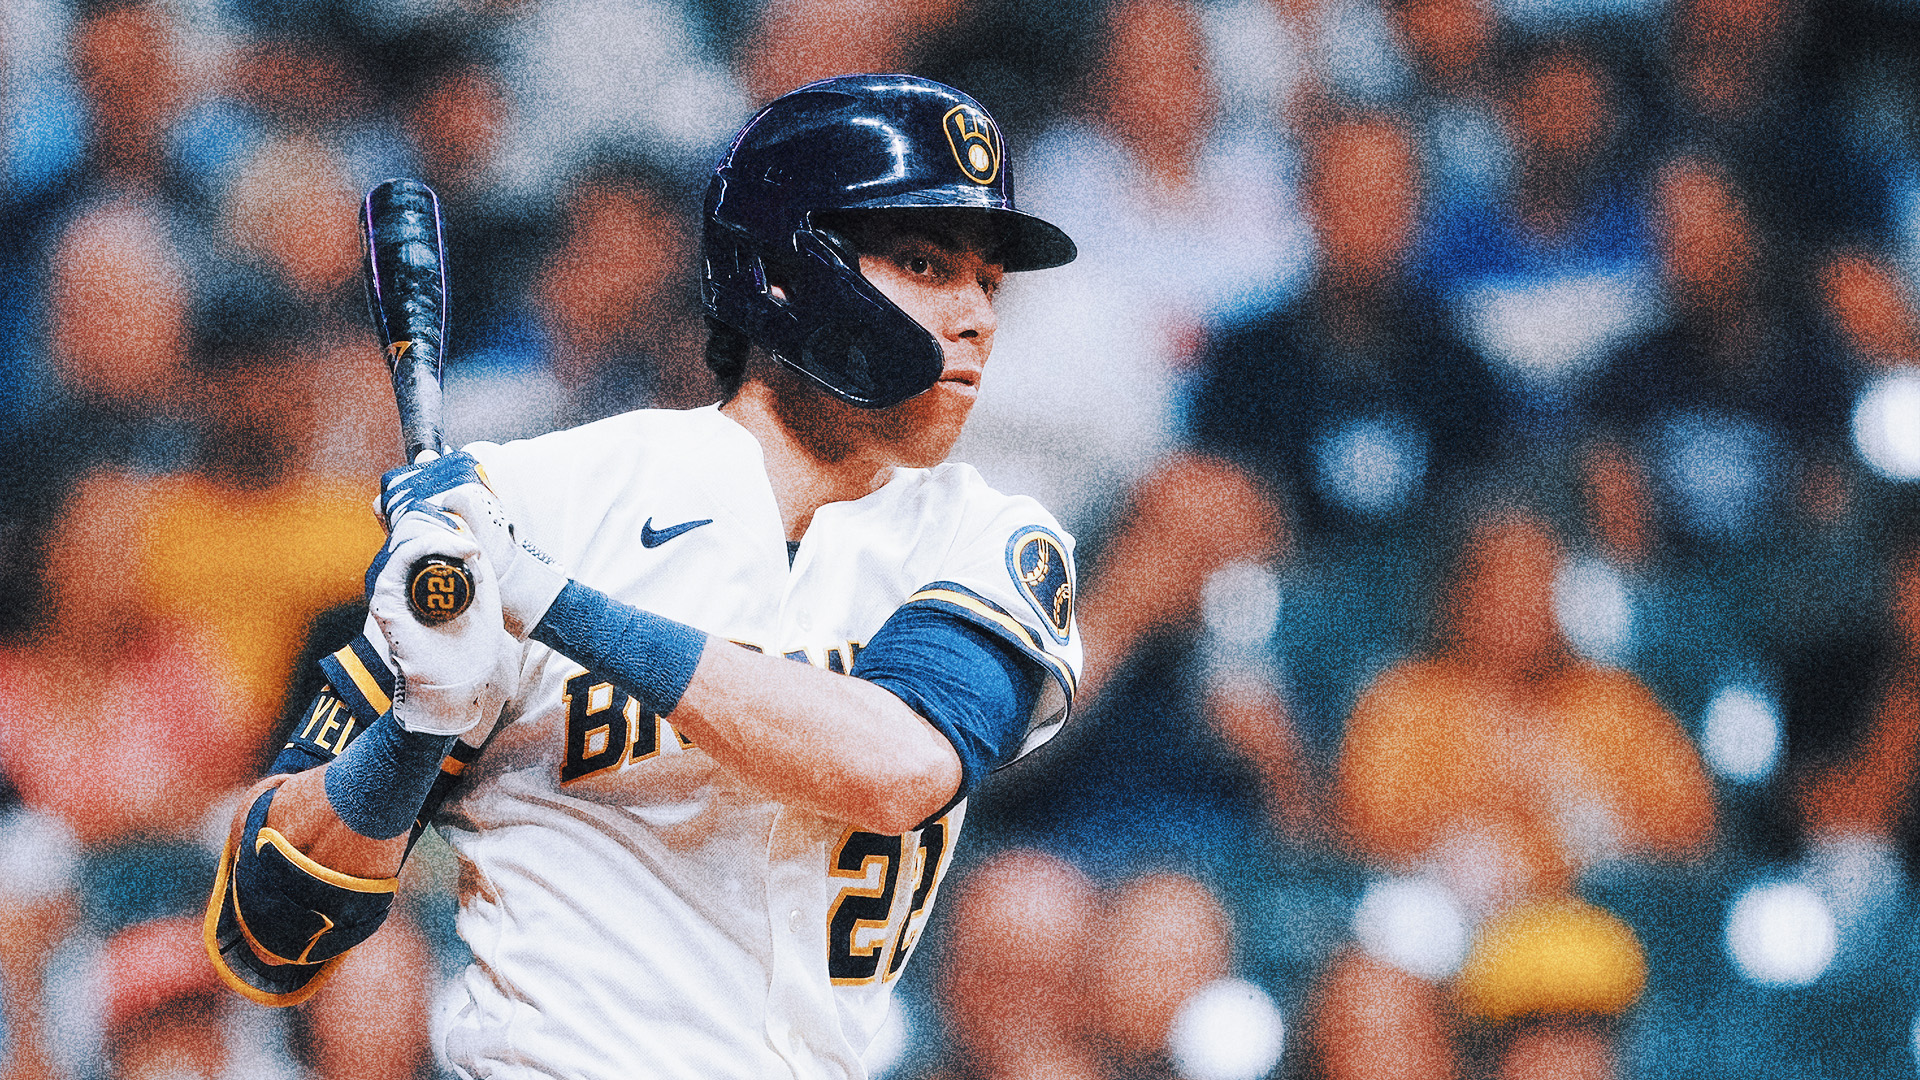 Christian Yelich's revival evoking MVP past while fueling Brewers' present